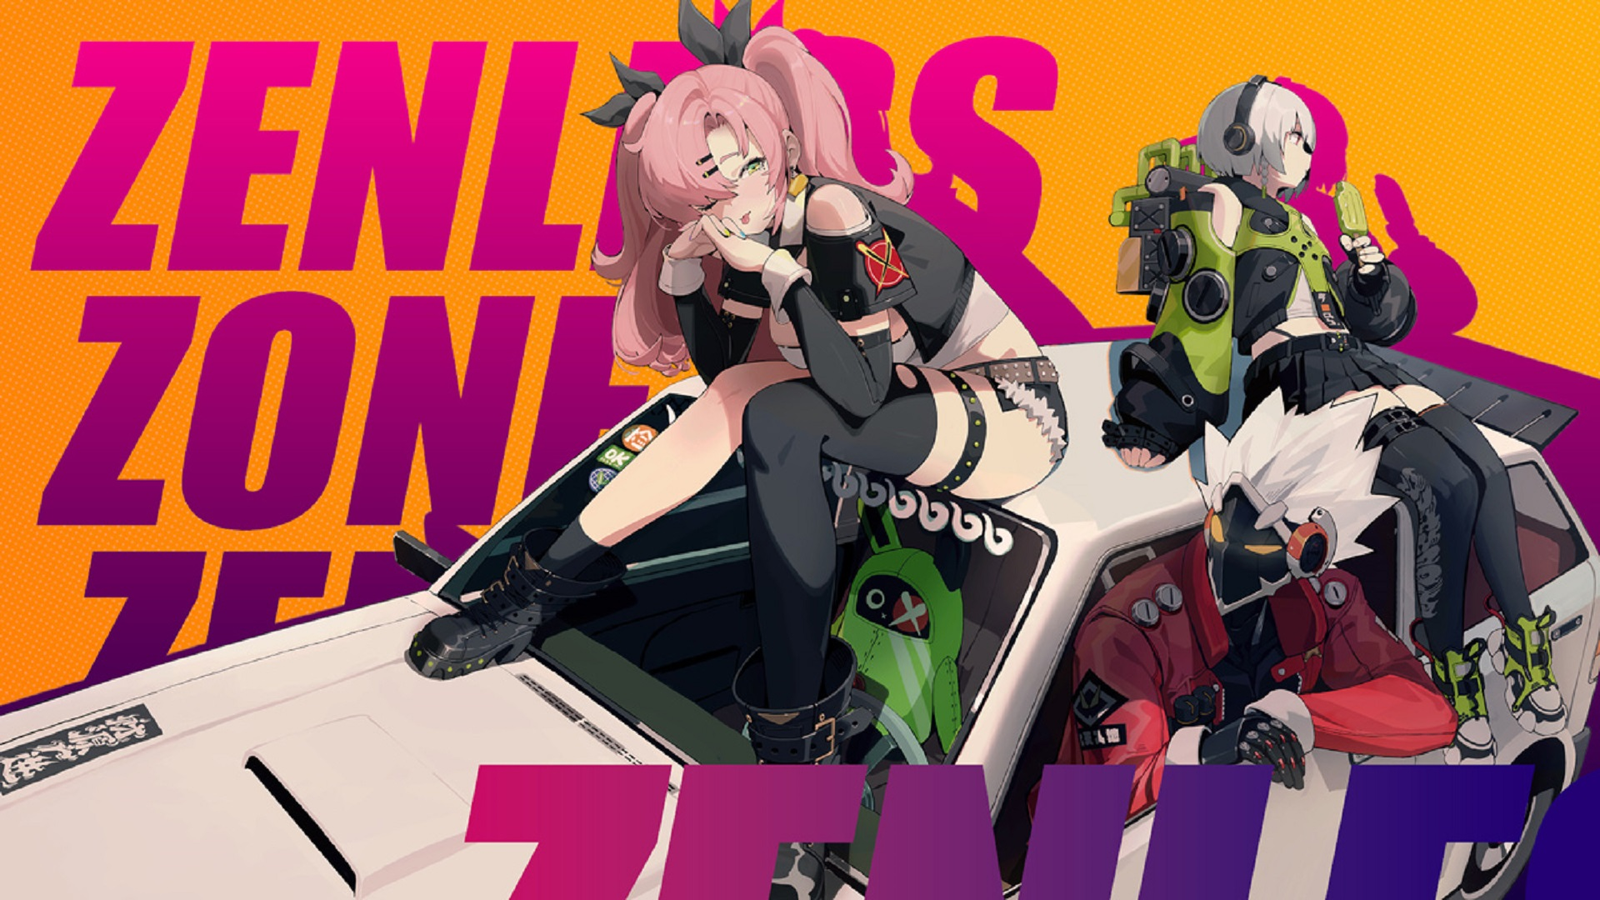 Zenless Zone Zero's closed beta has started, offering glimpses of its  Genshin Impact-style combat